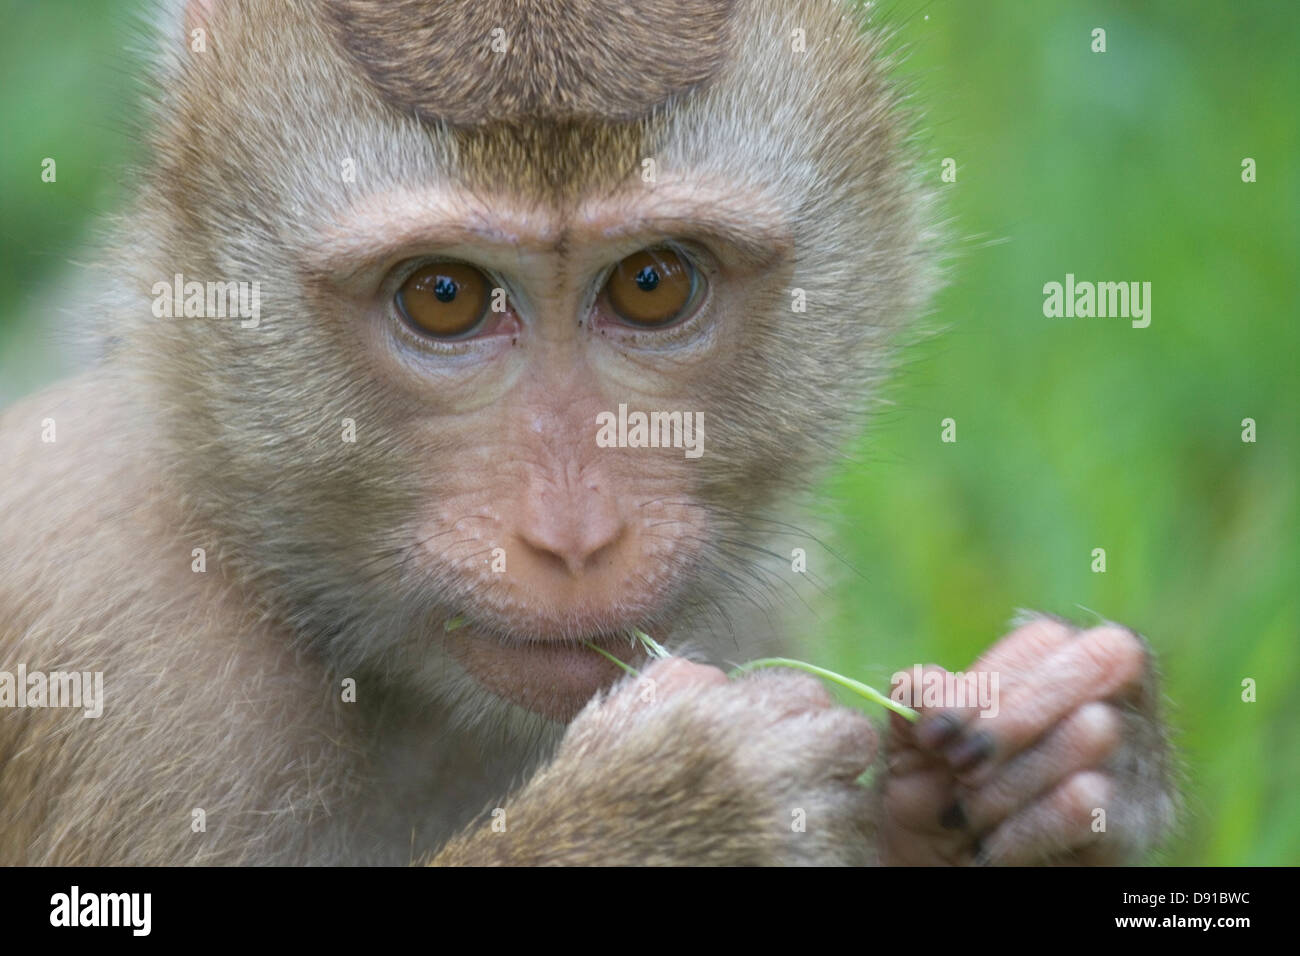 Thai monkey (Macaque) chewing on grass, Koh Samui, Thailand Stock Photo